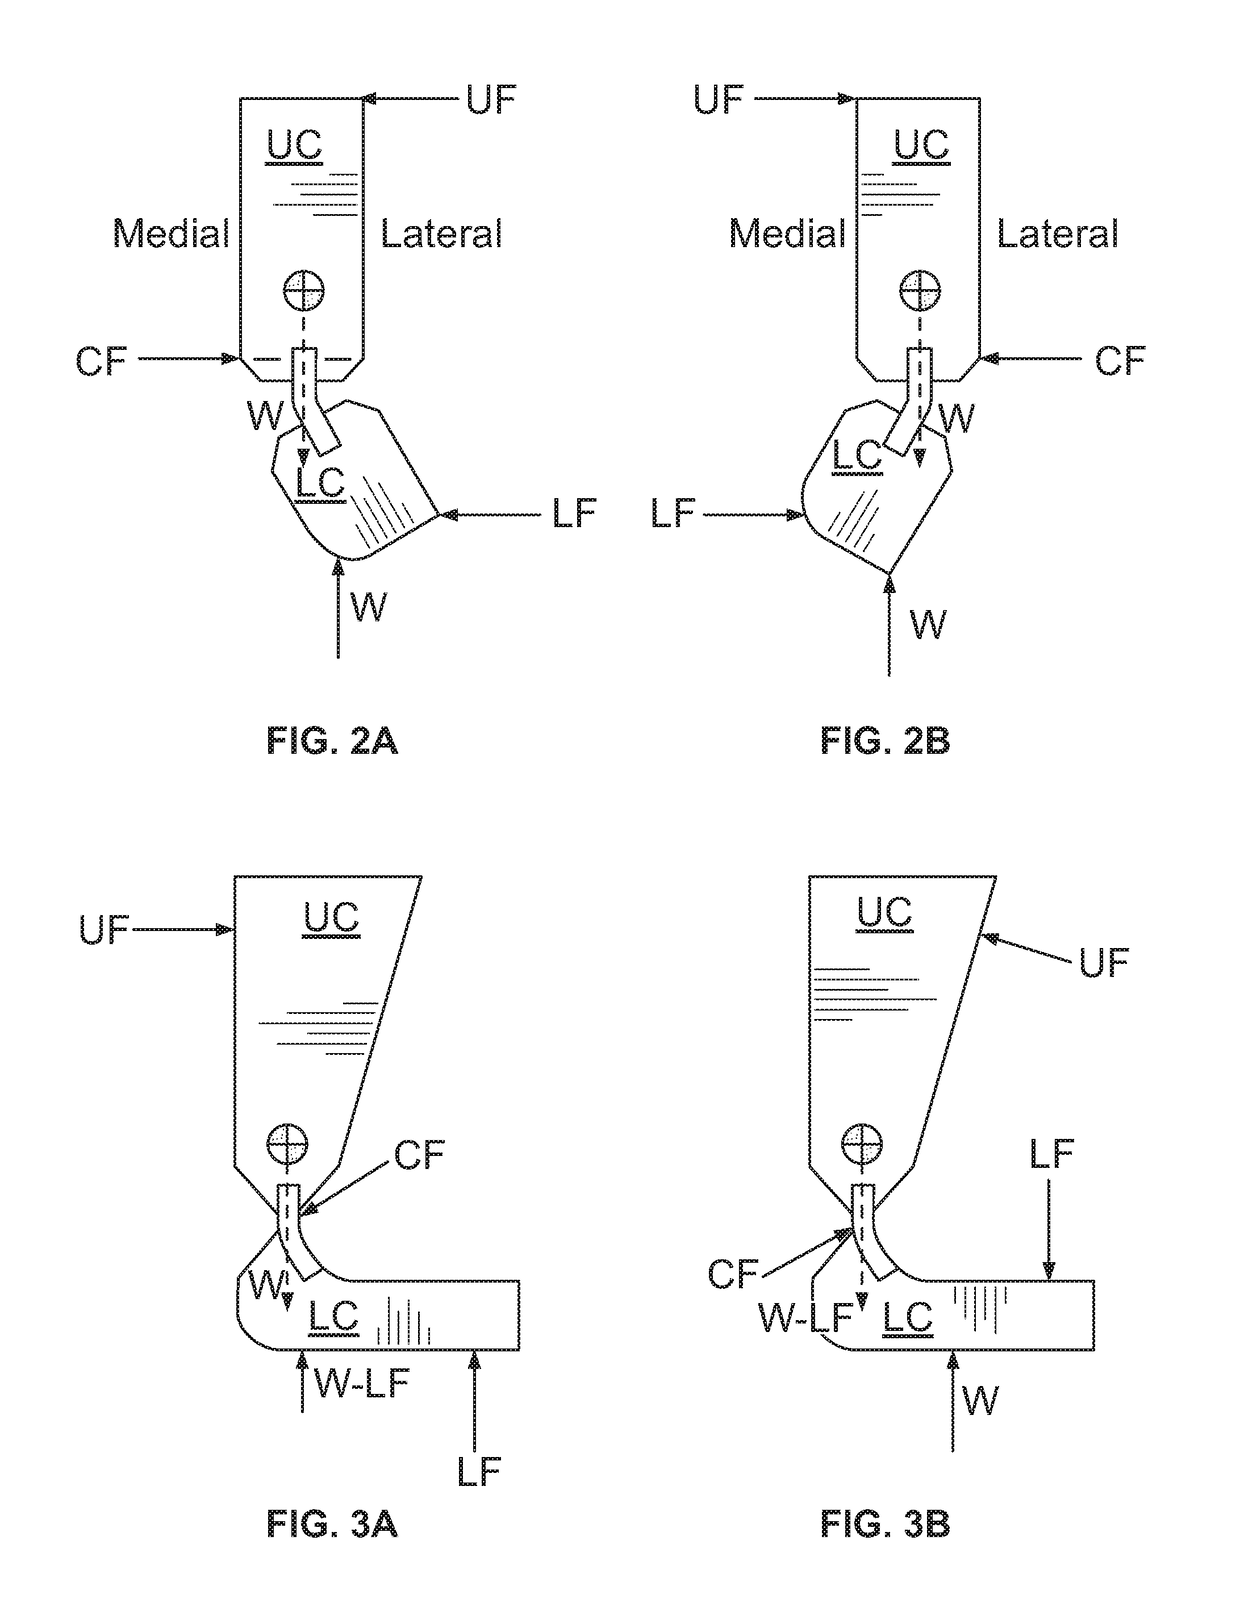 Configurable orthosis and method of definitive orthotic design, fabrication and validation